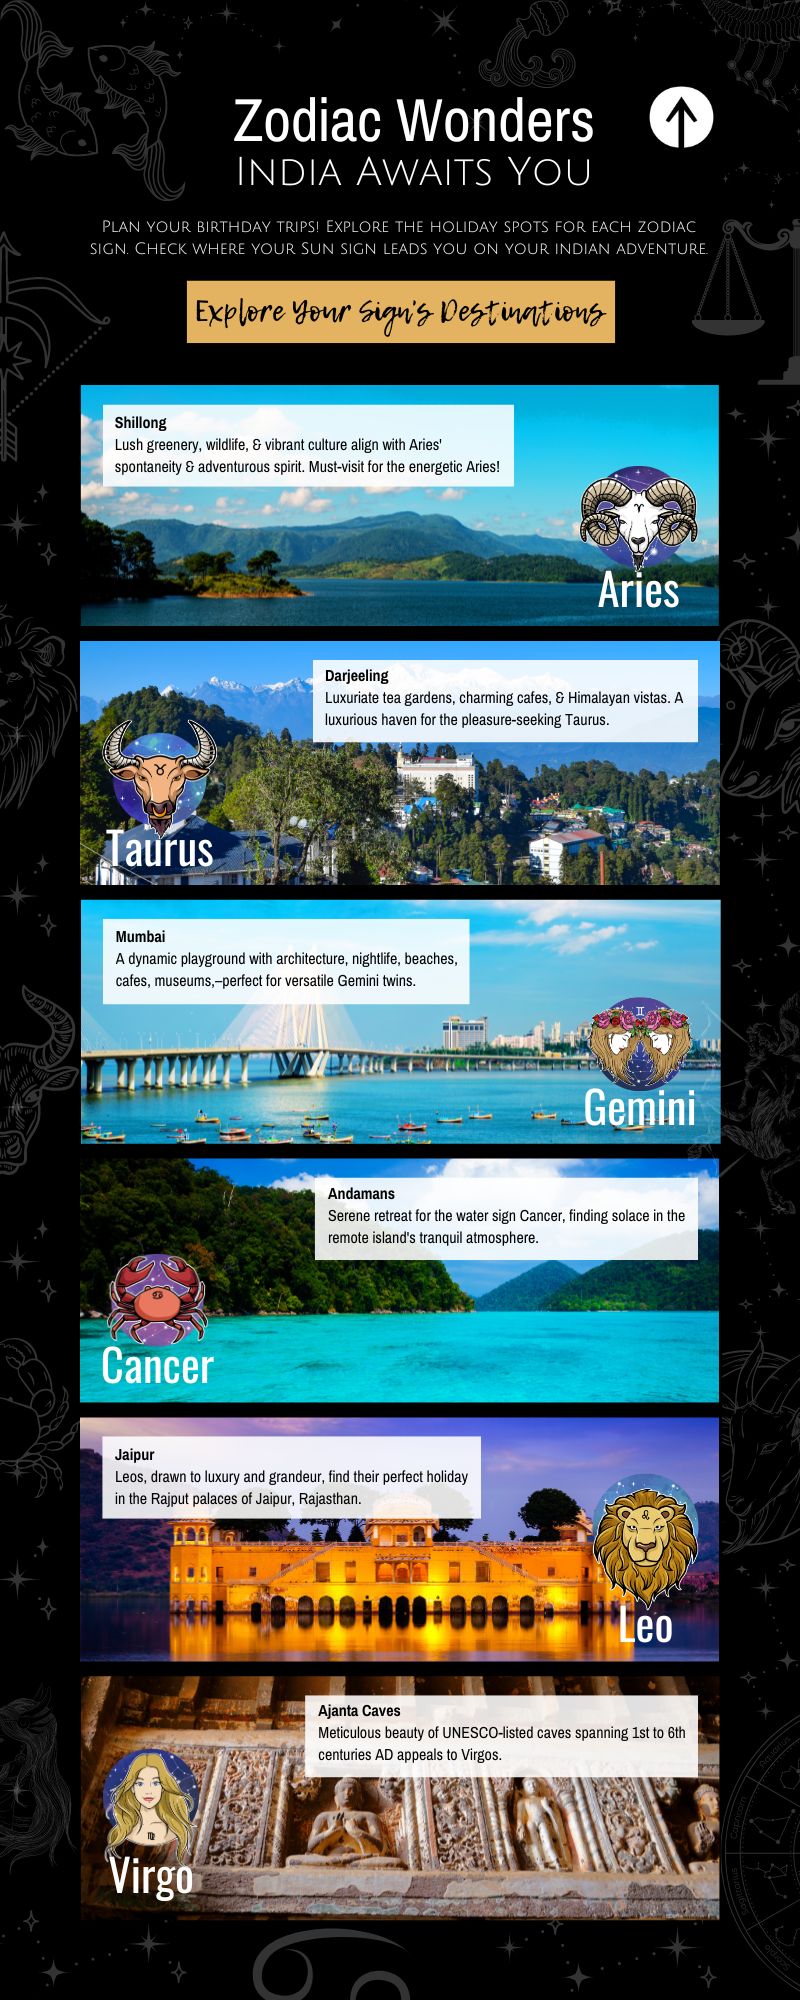 Places To Visit In India According To Your Zodiac Sign infographic 